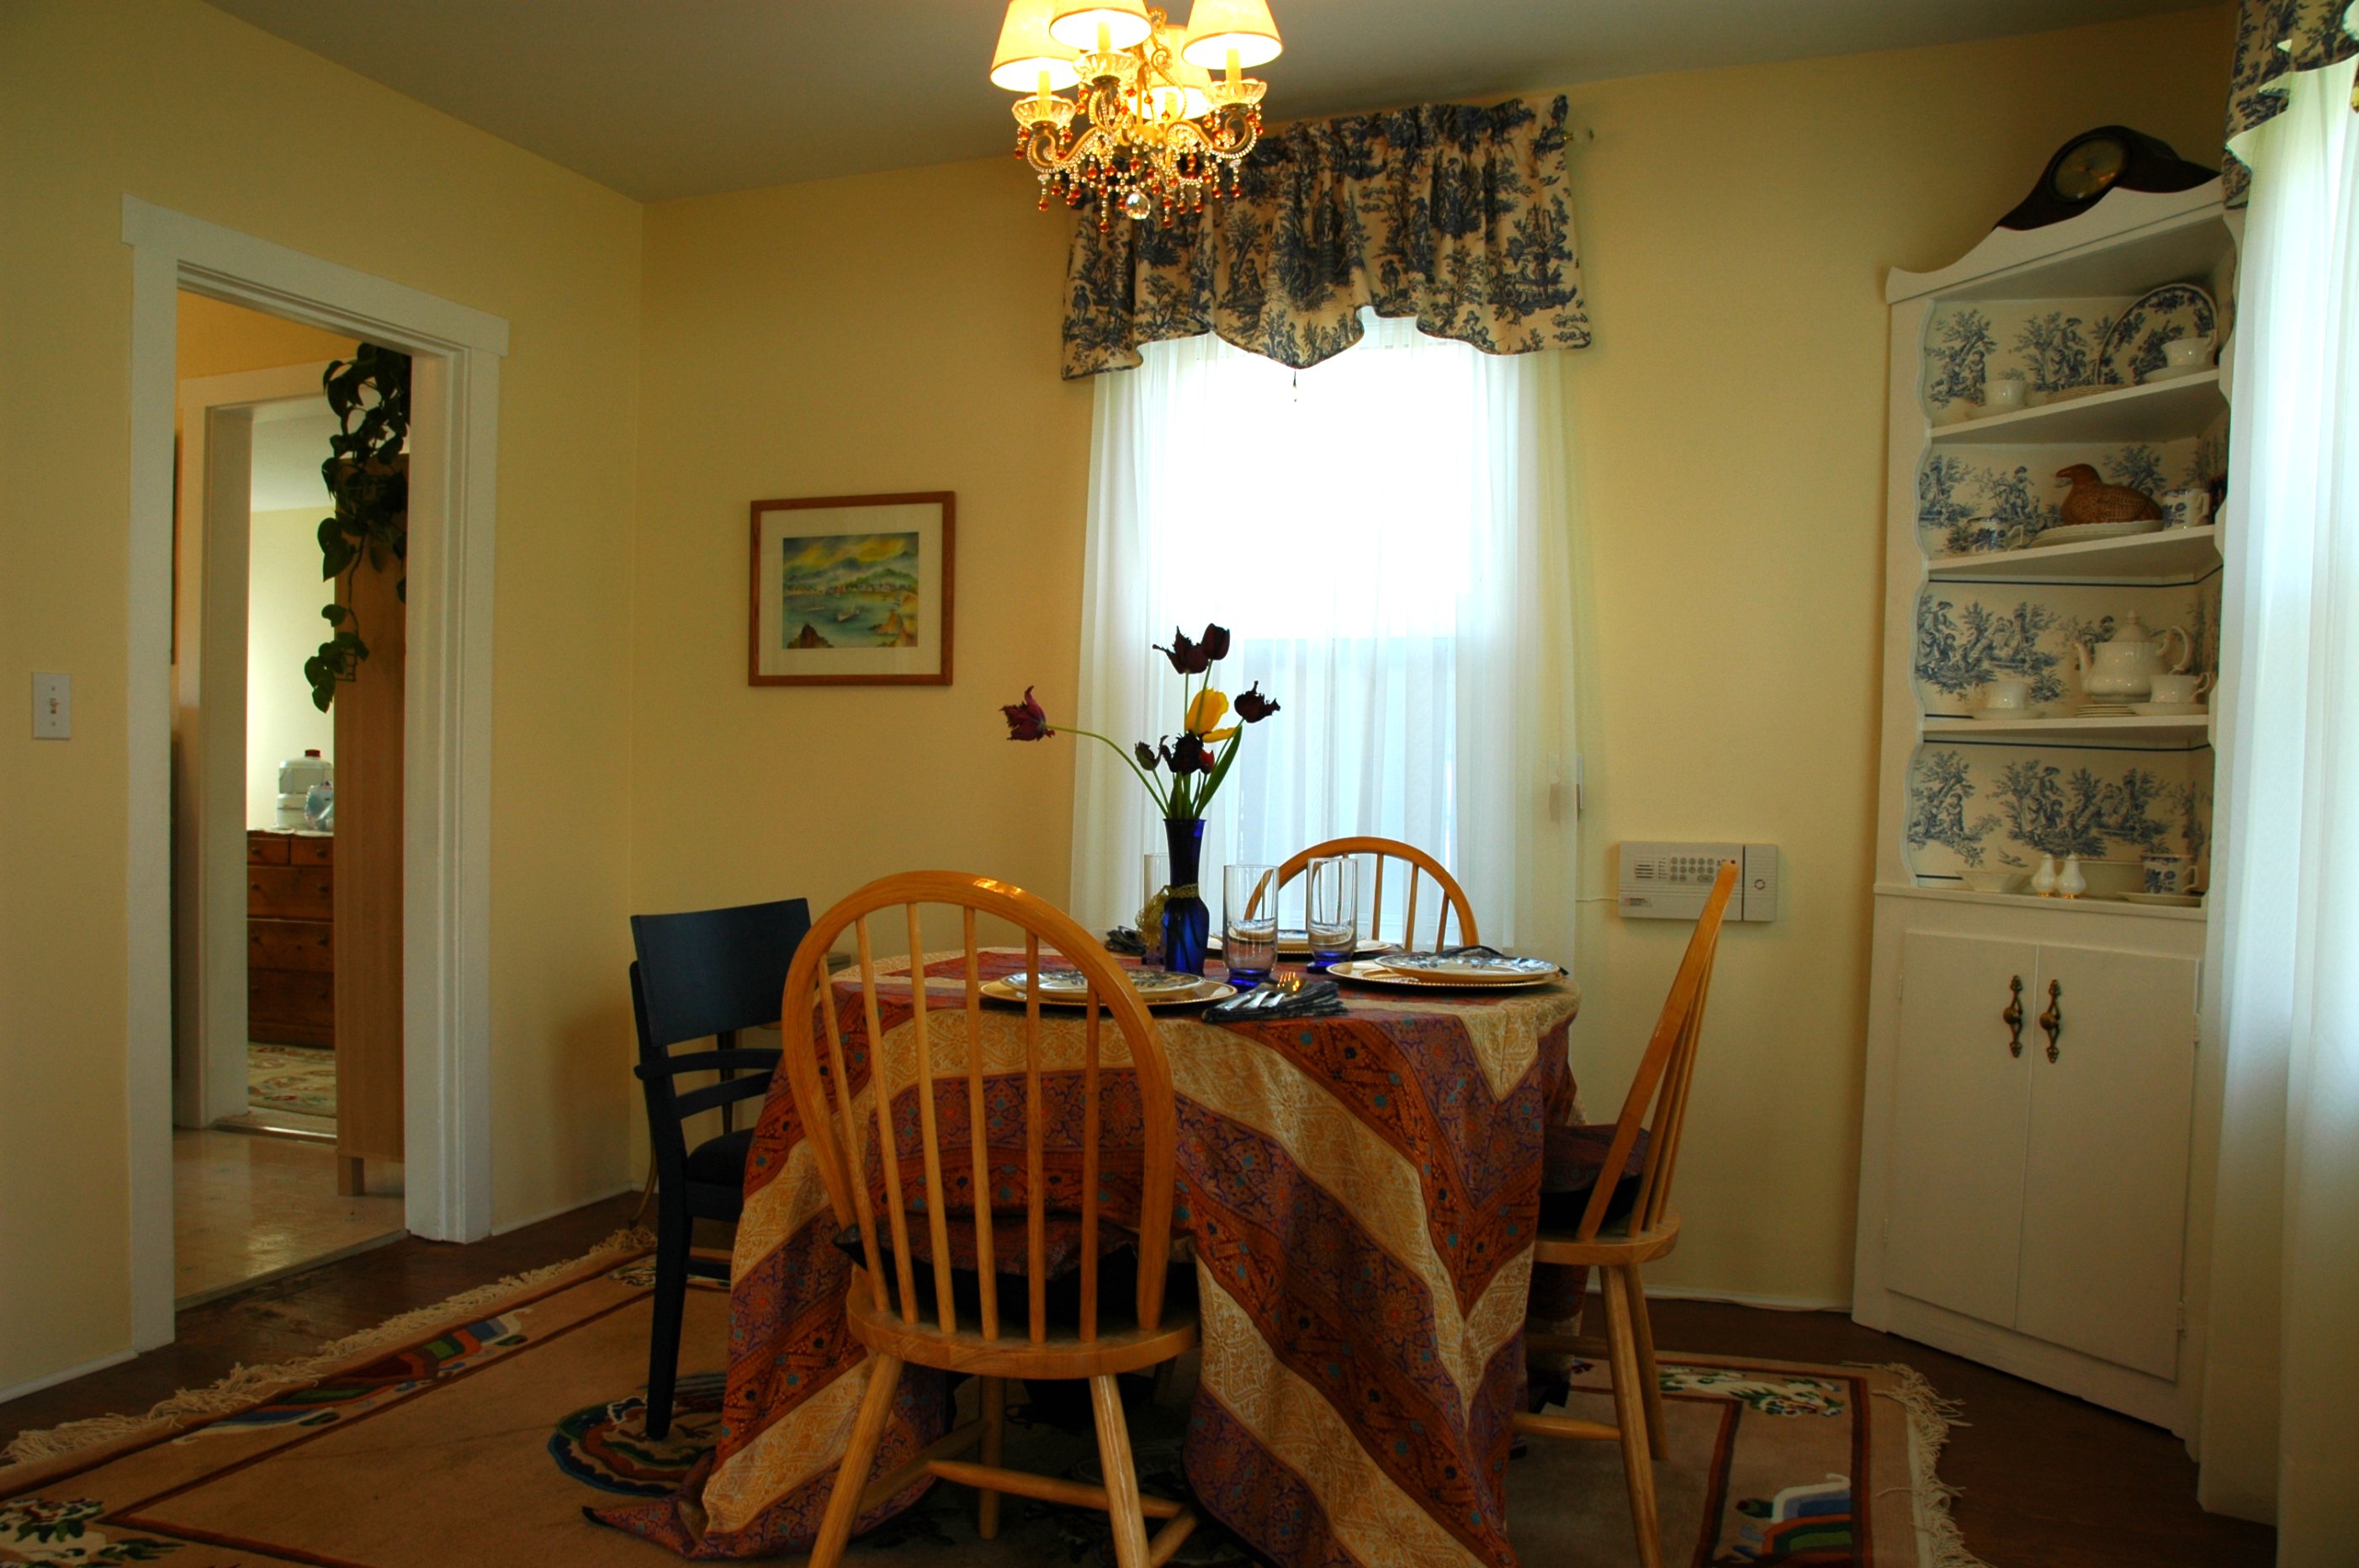 Advantages And Disadvantages Of Having A Carpet In The Dining Room